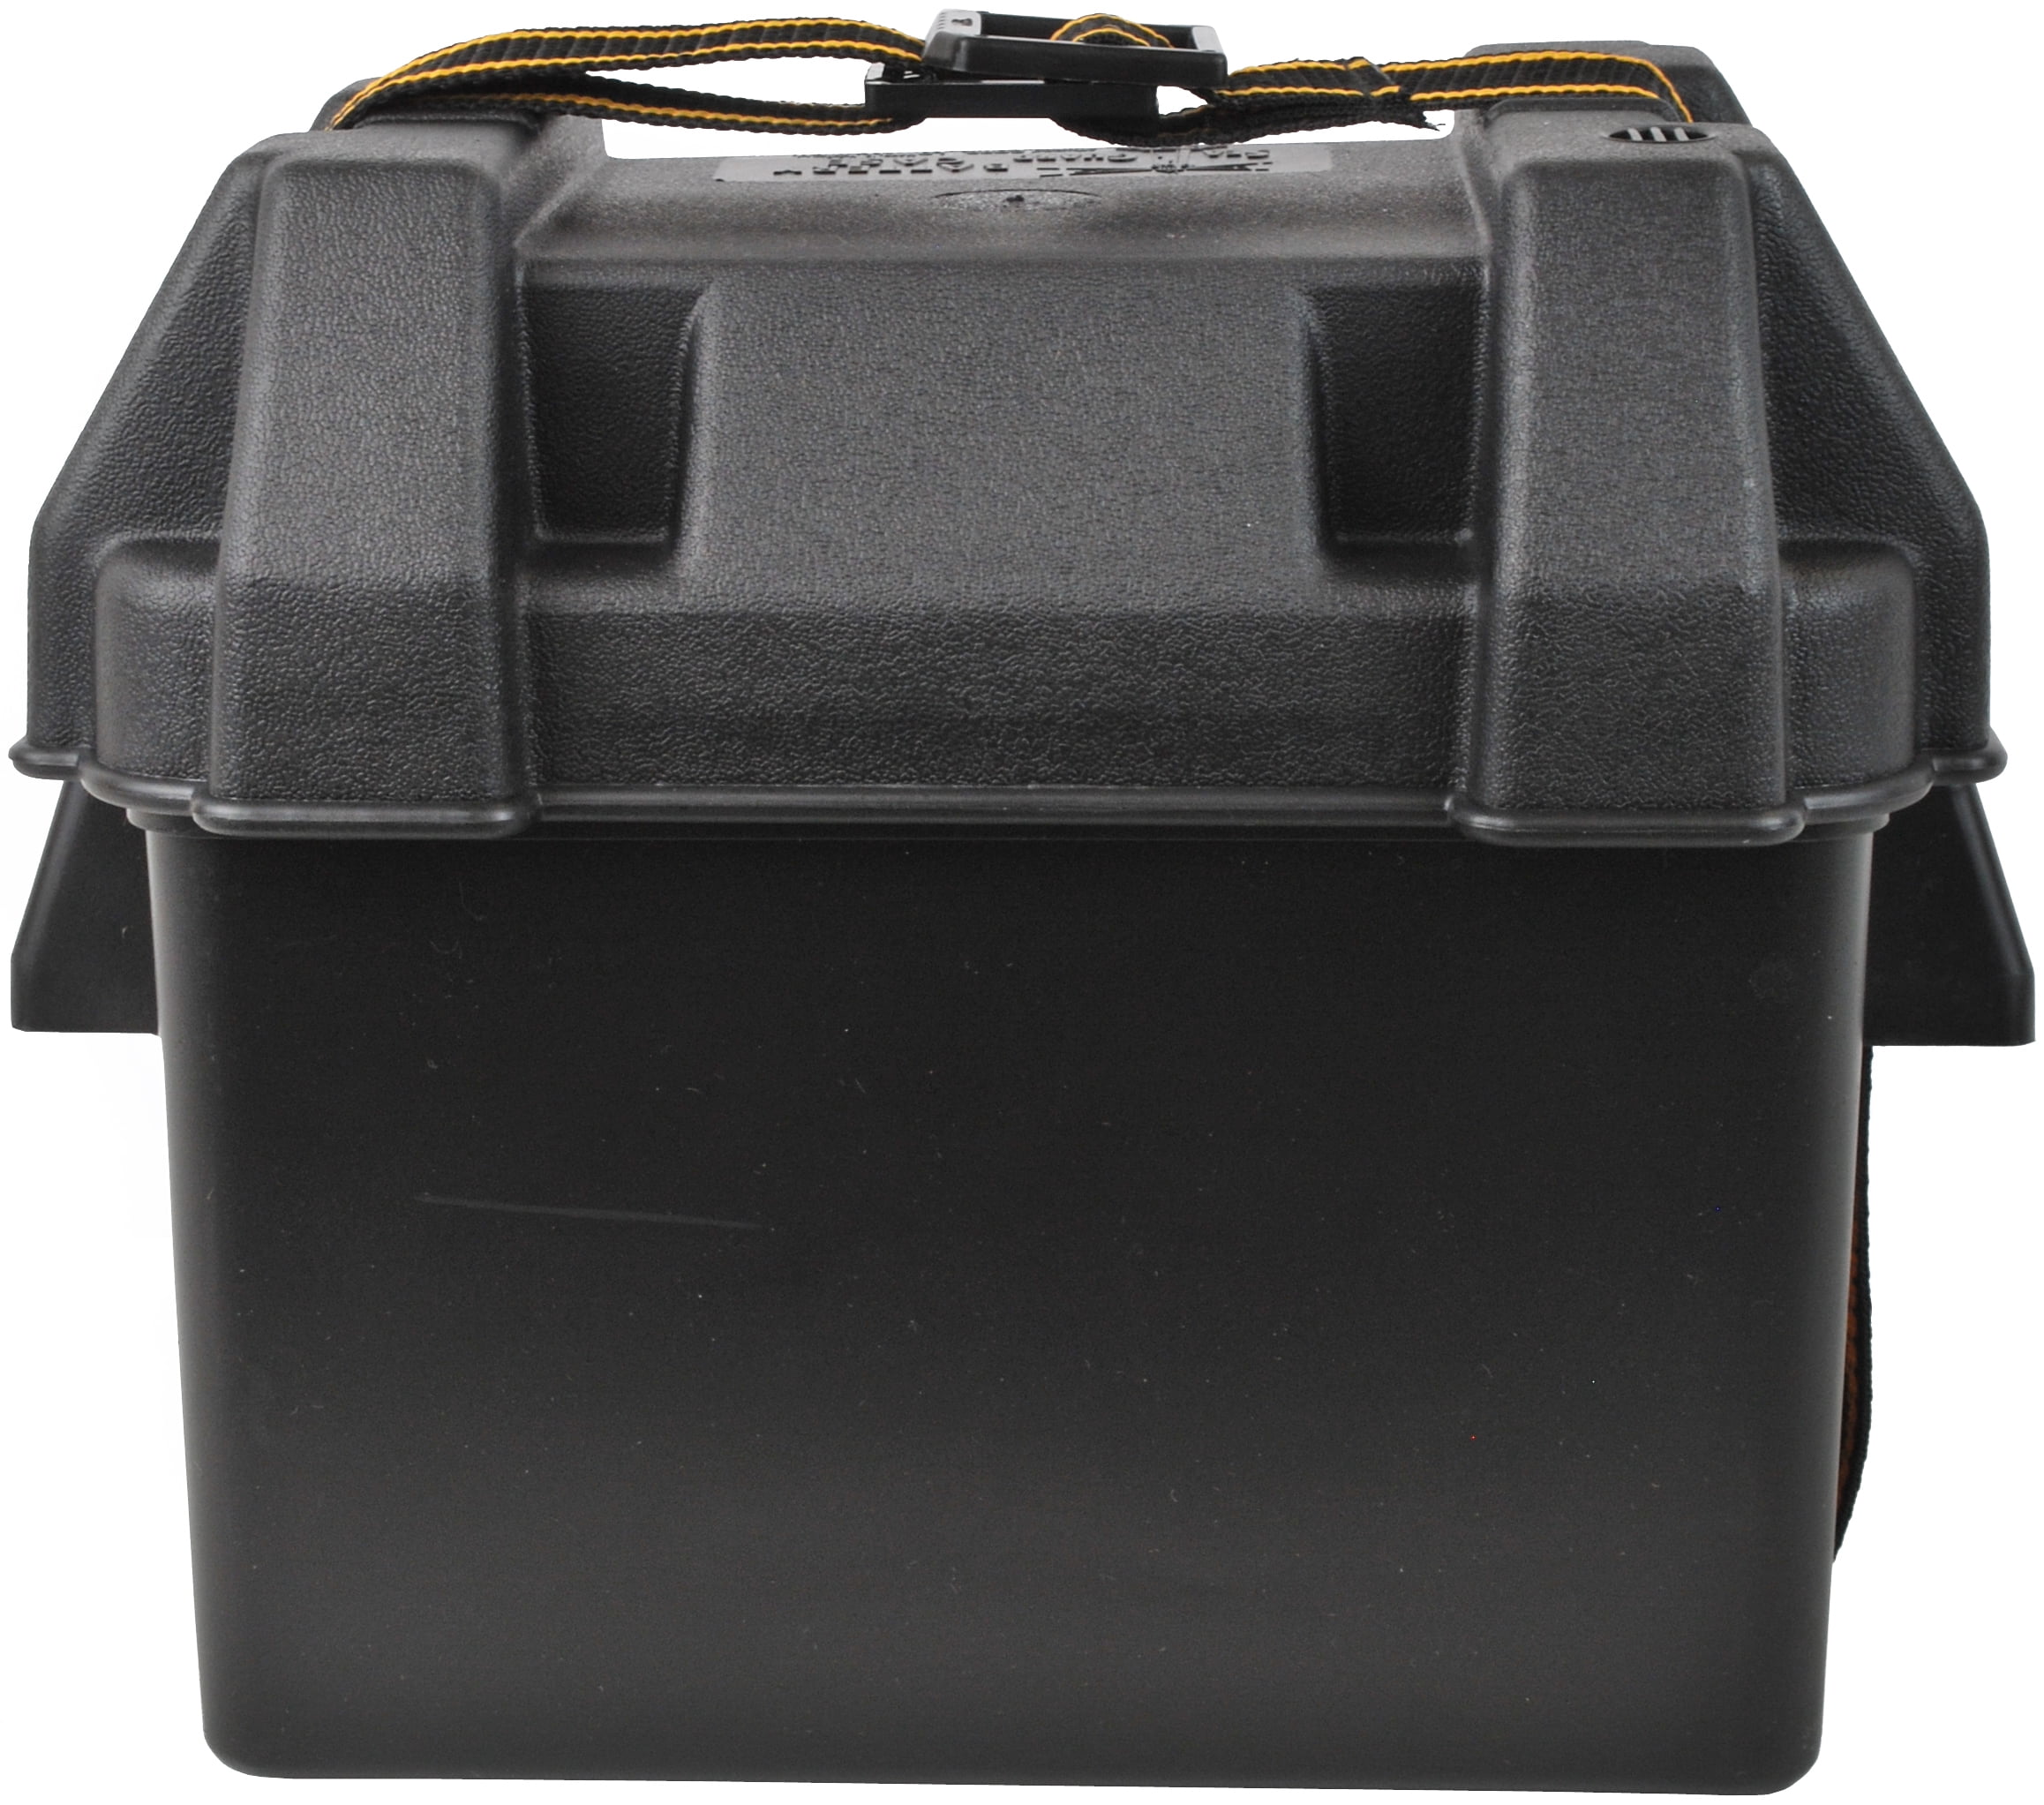 Attwood 9082-1 U1 Small Series 16 Vented Marine Boat Battery Box with  Mounting Kit and Strap, Black 